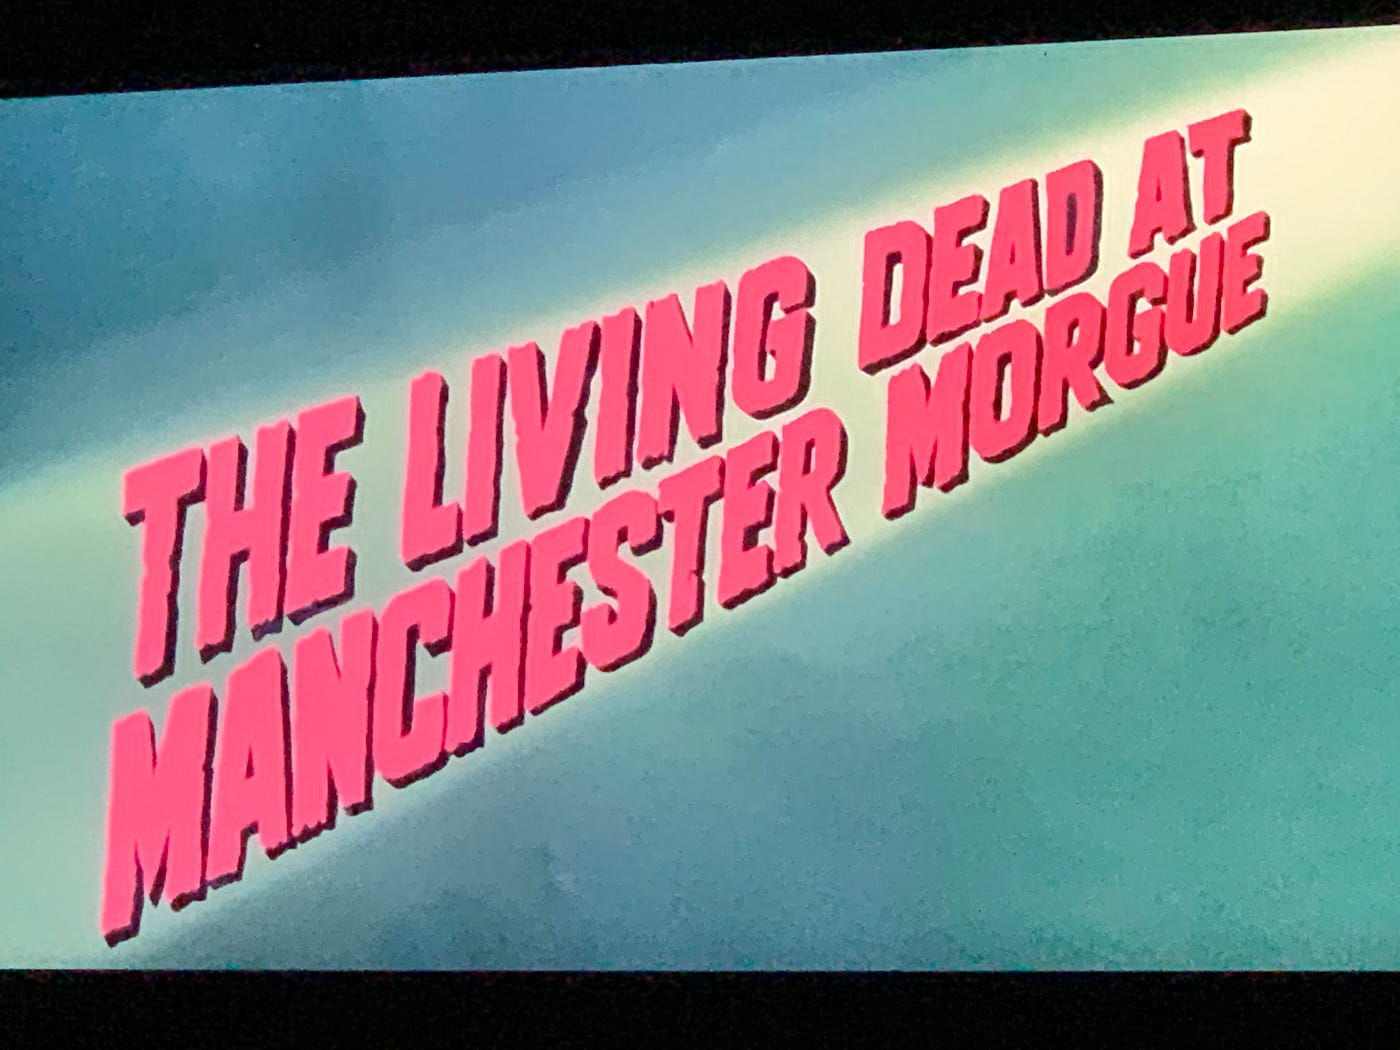 The Living Dead at Manchester Morgue Blu-ray Review (Synapse Films